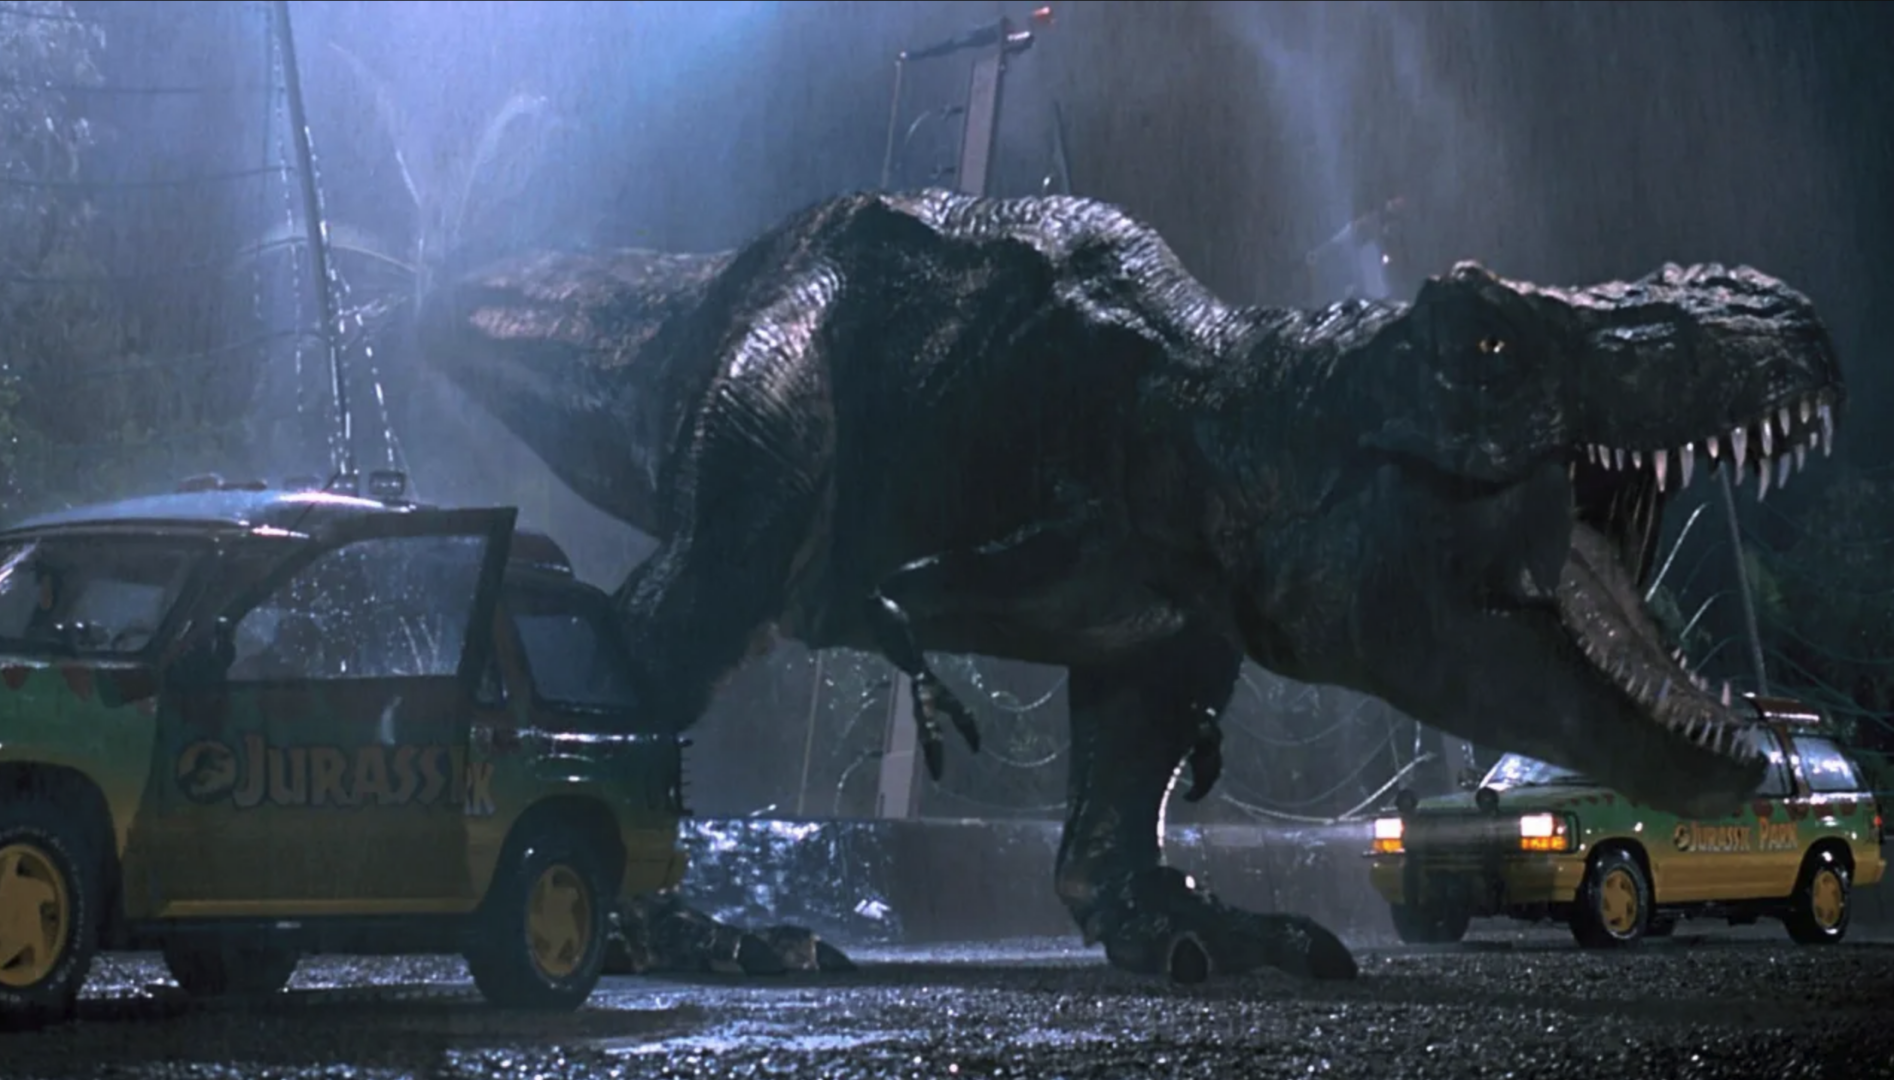 Film still of a T Rex dinosaur roaring surrounded by cars